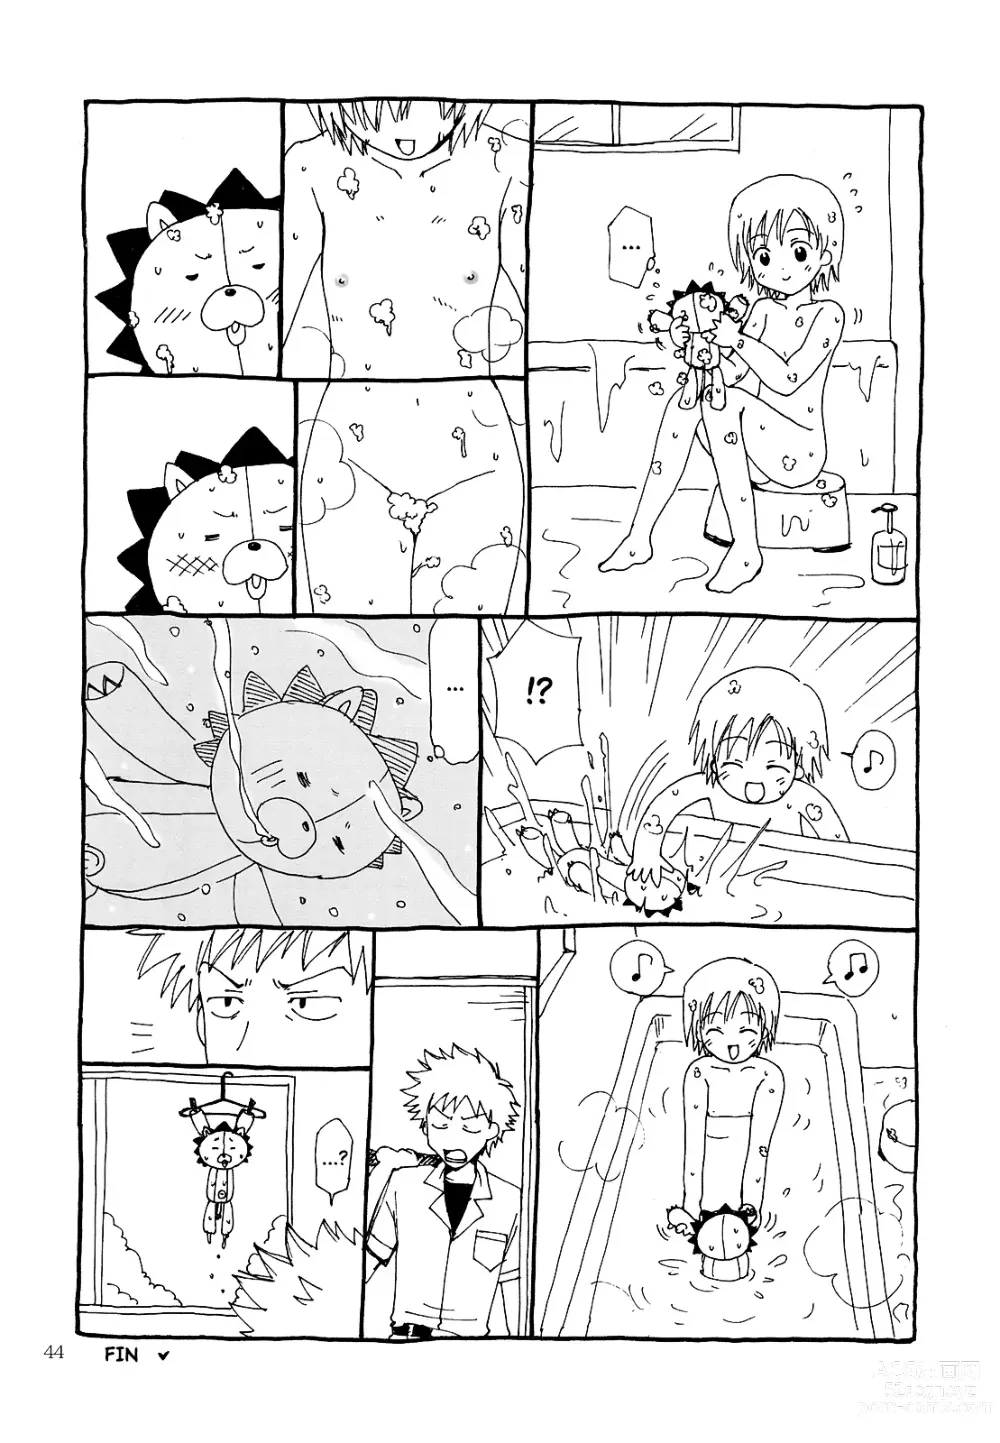 Page 44 of doujinshi OTHERSIDE Kaiteiban